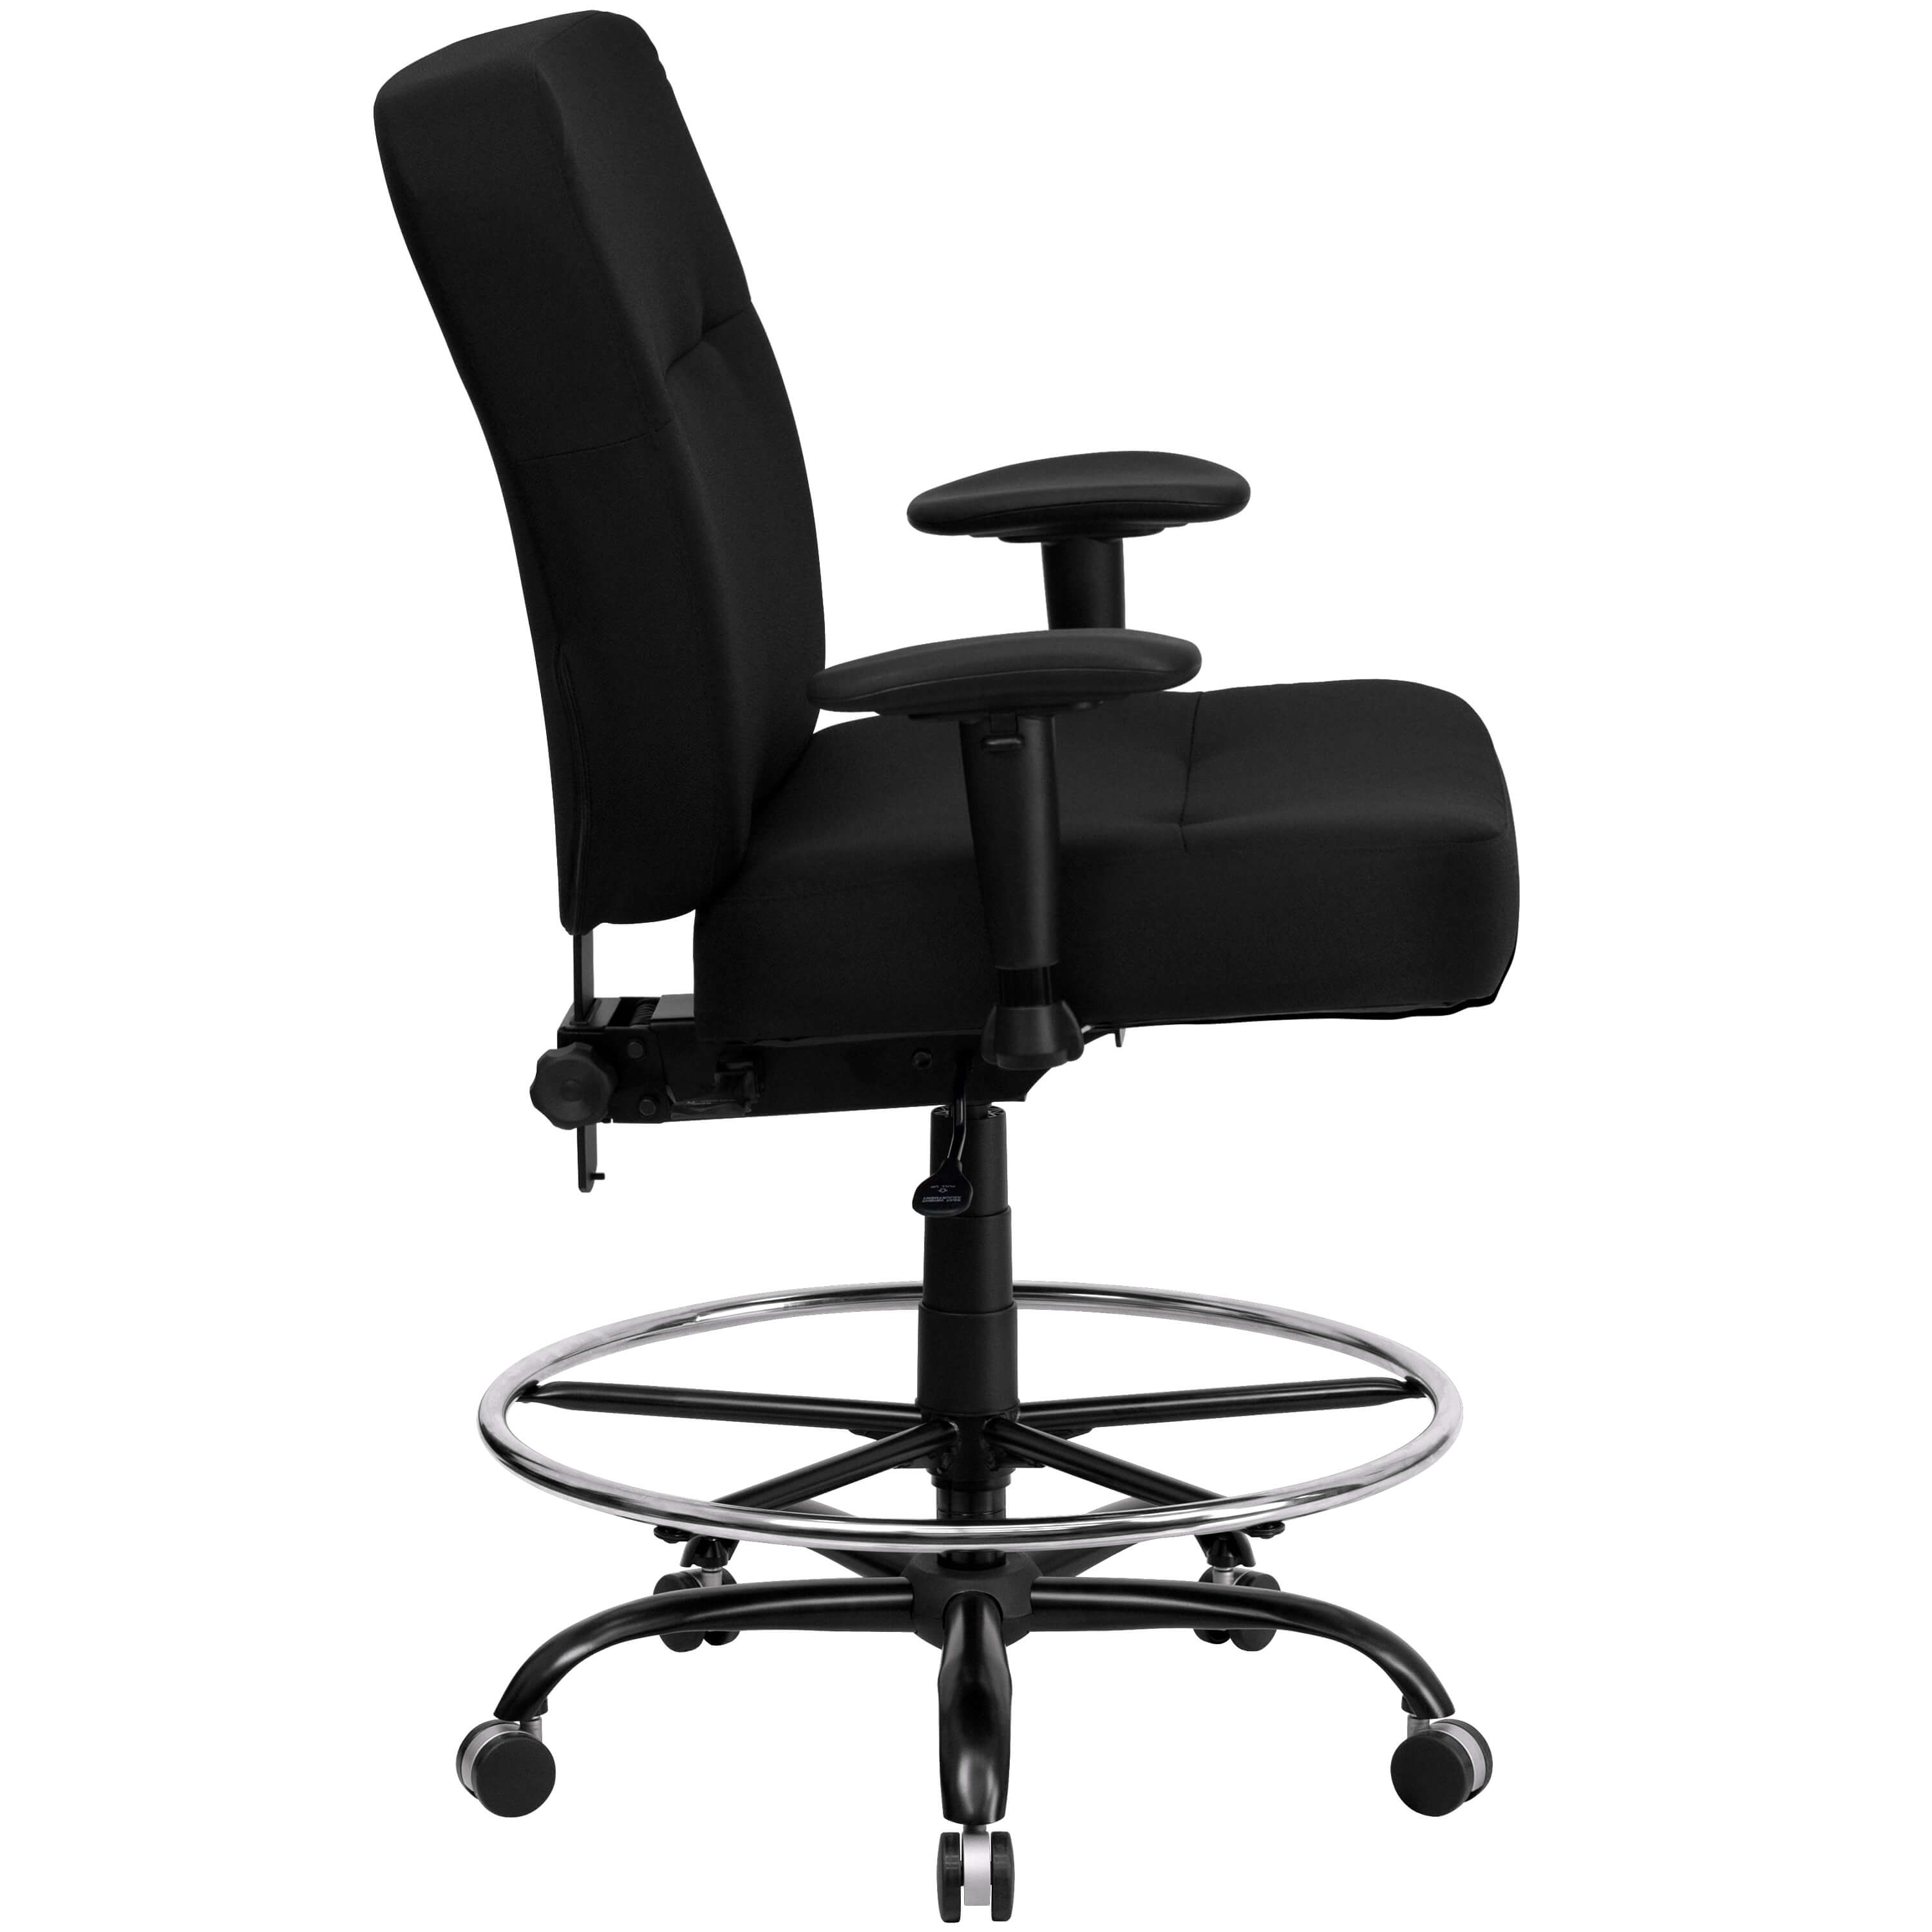 Large size office chairs side view